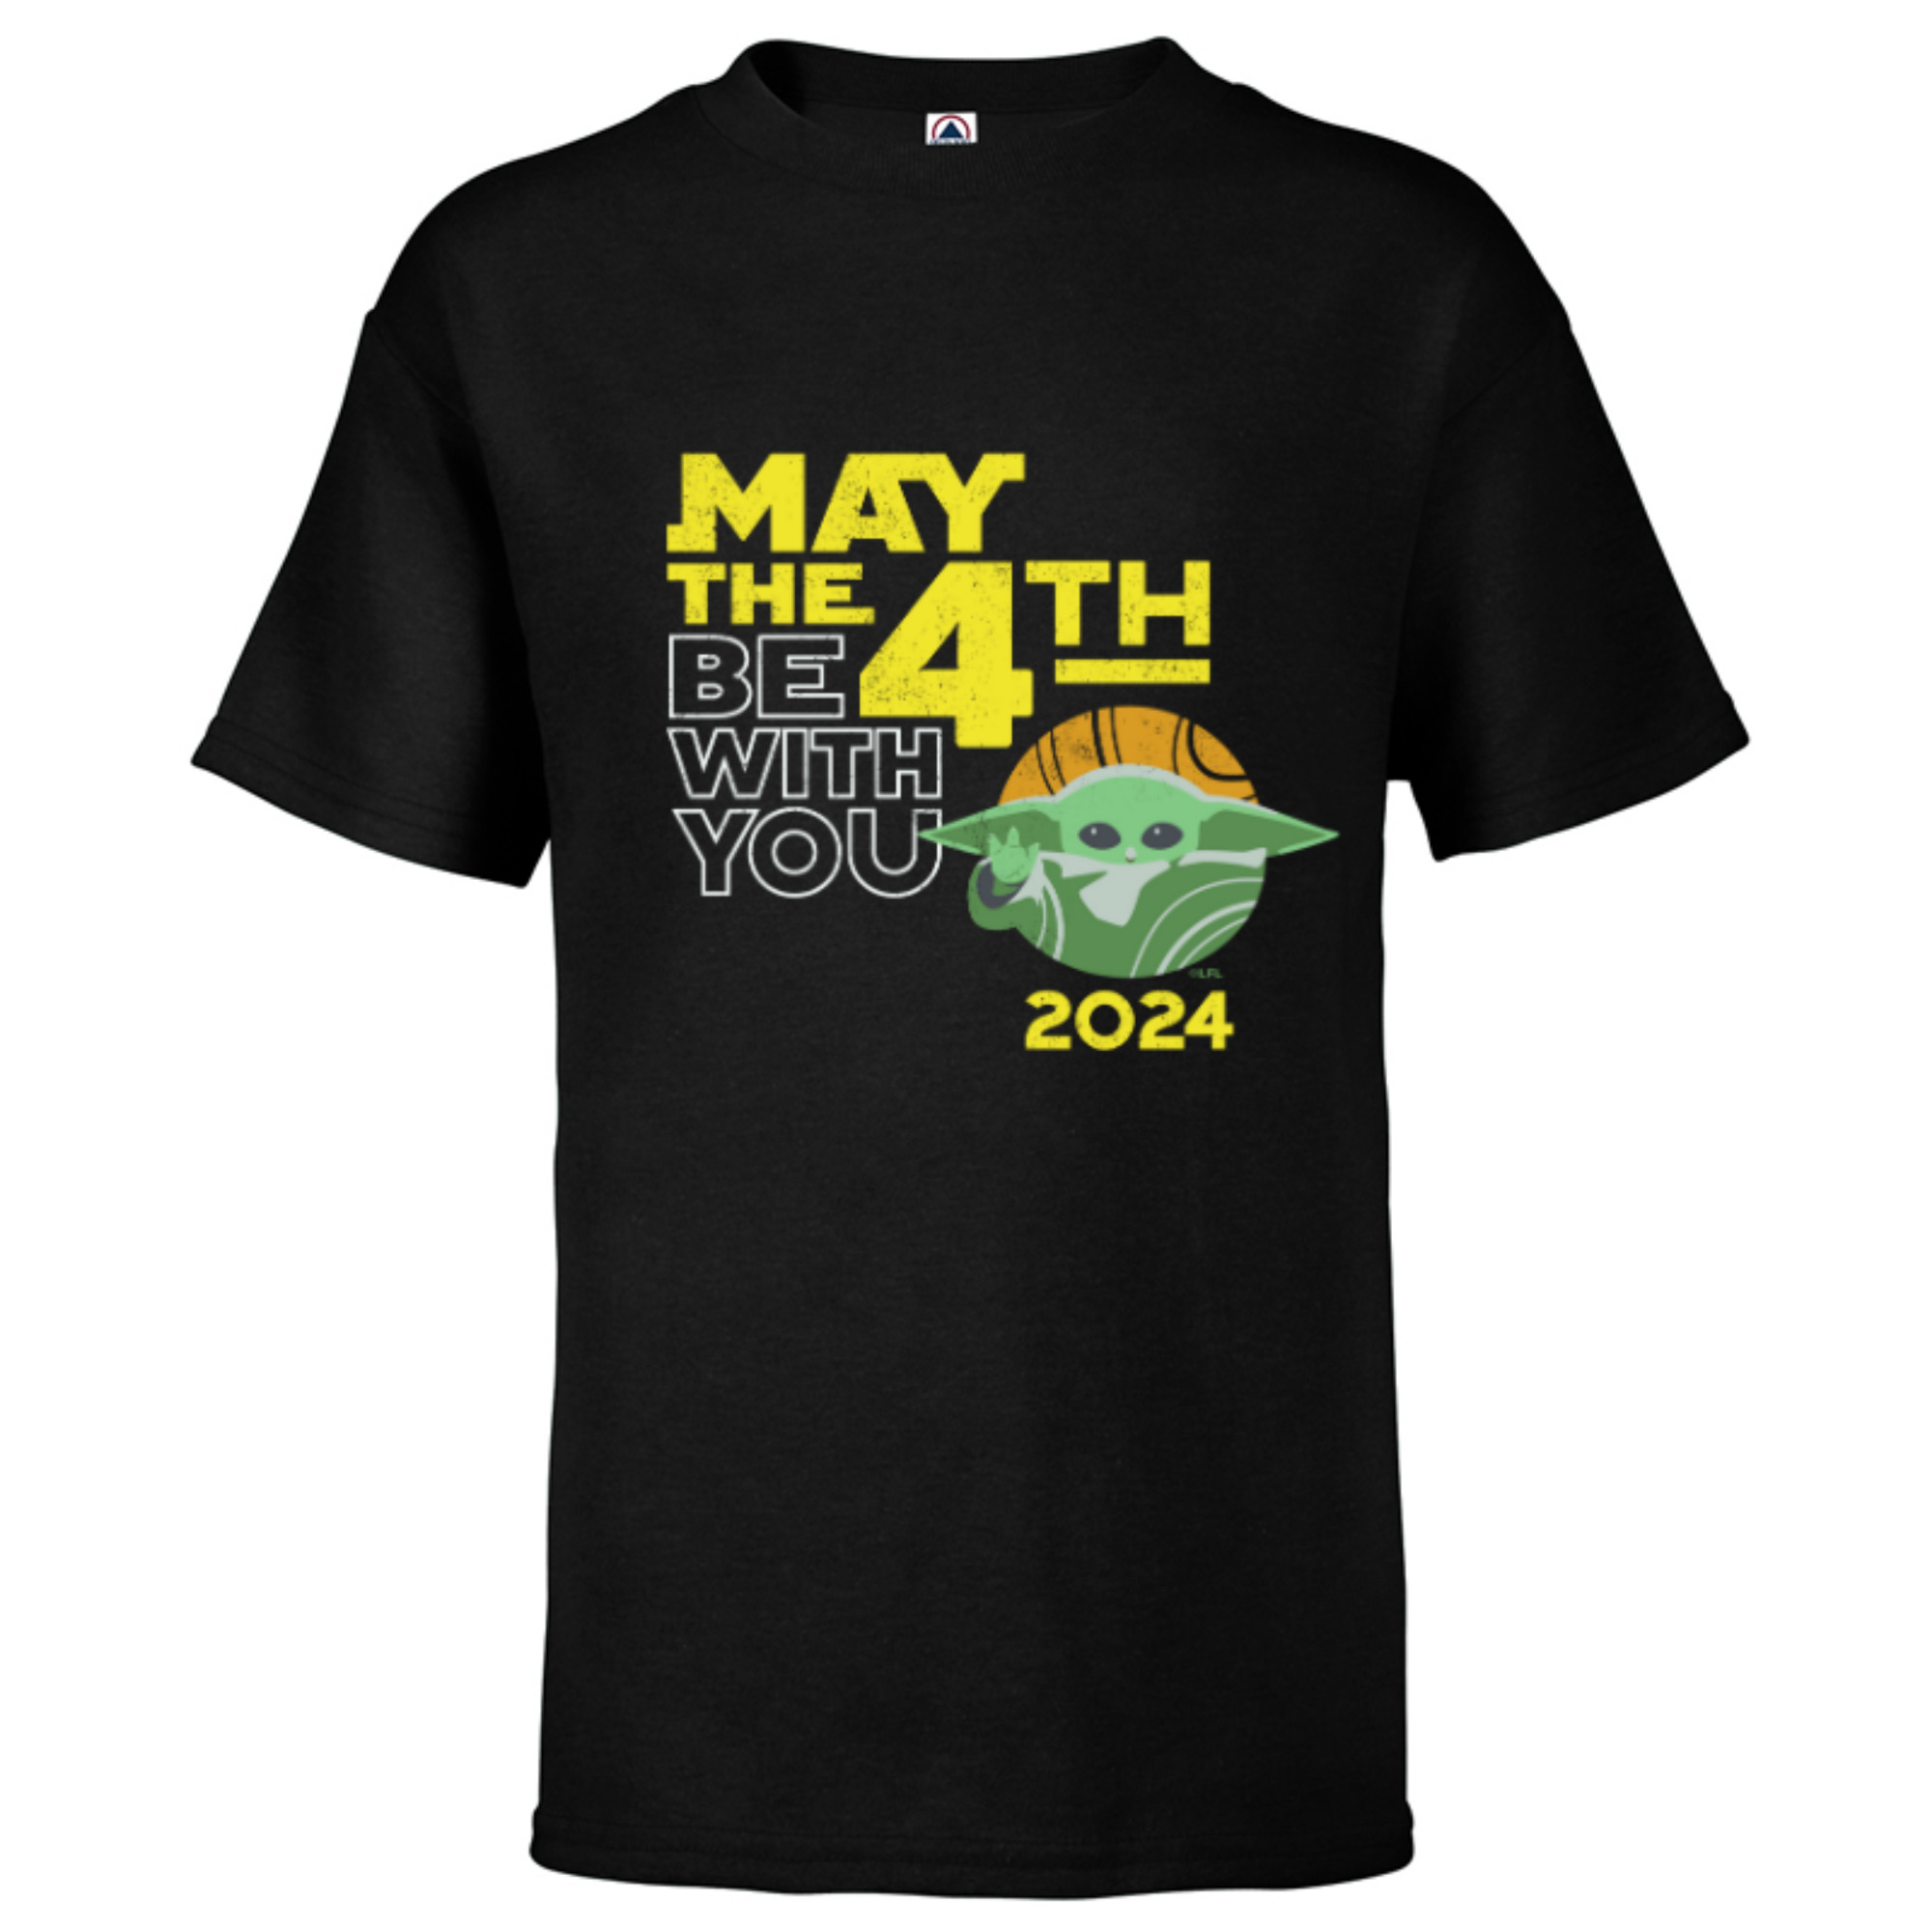 Star Wars Grogu May the 4th Be With You 2024 Distressed Look - Short Sleeve T-Shirt for Kids - Customized-Black